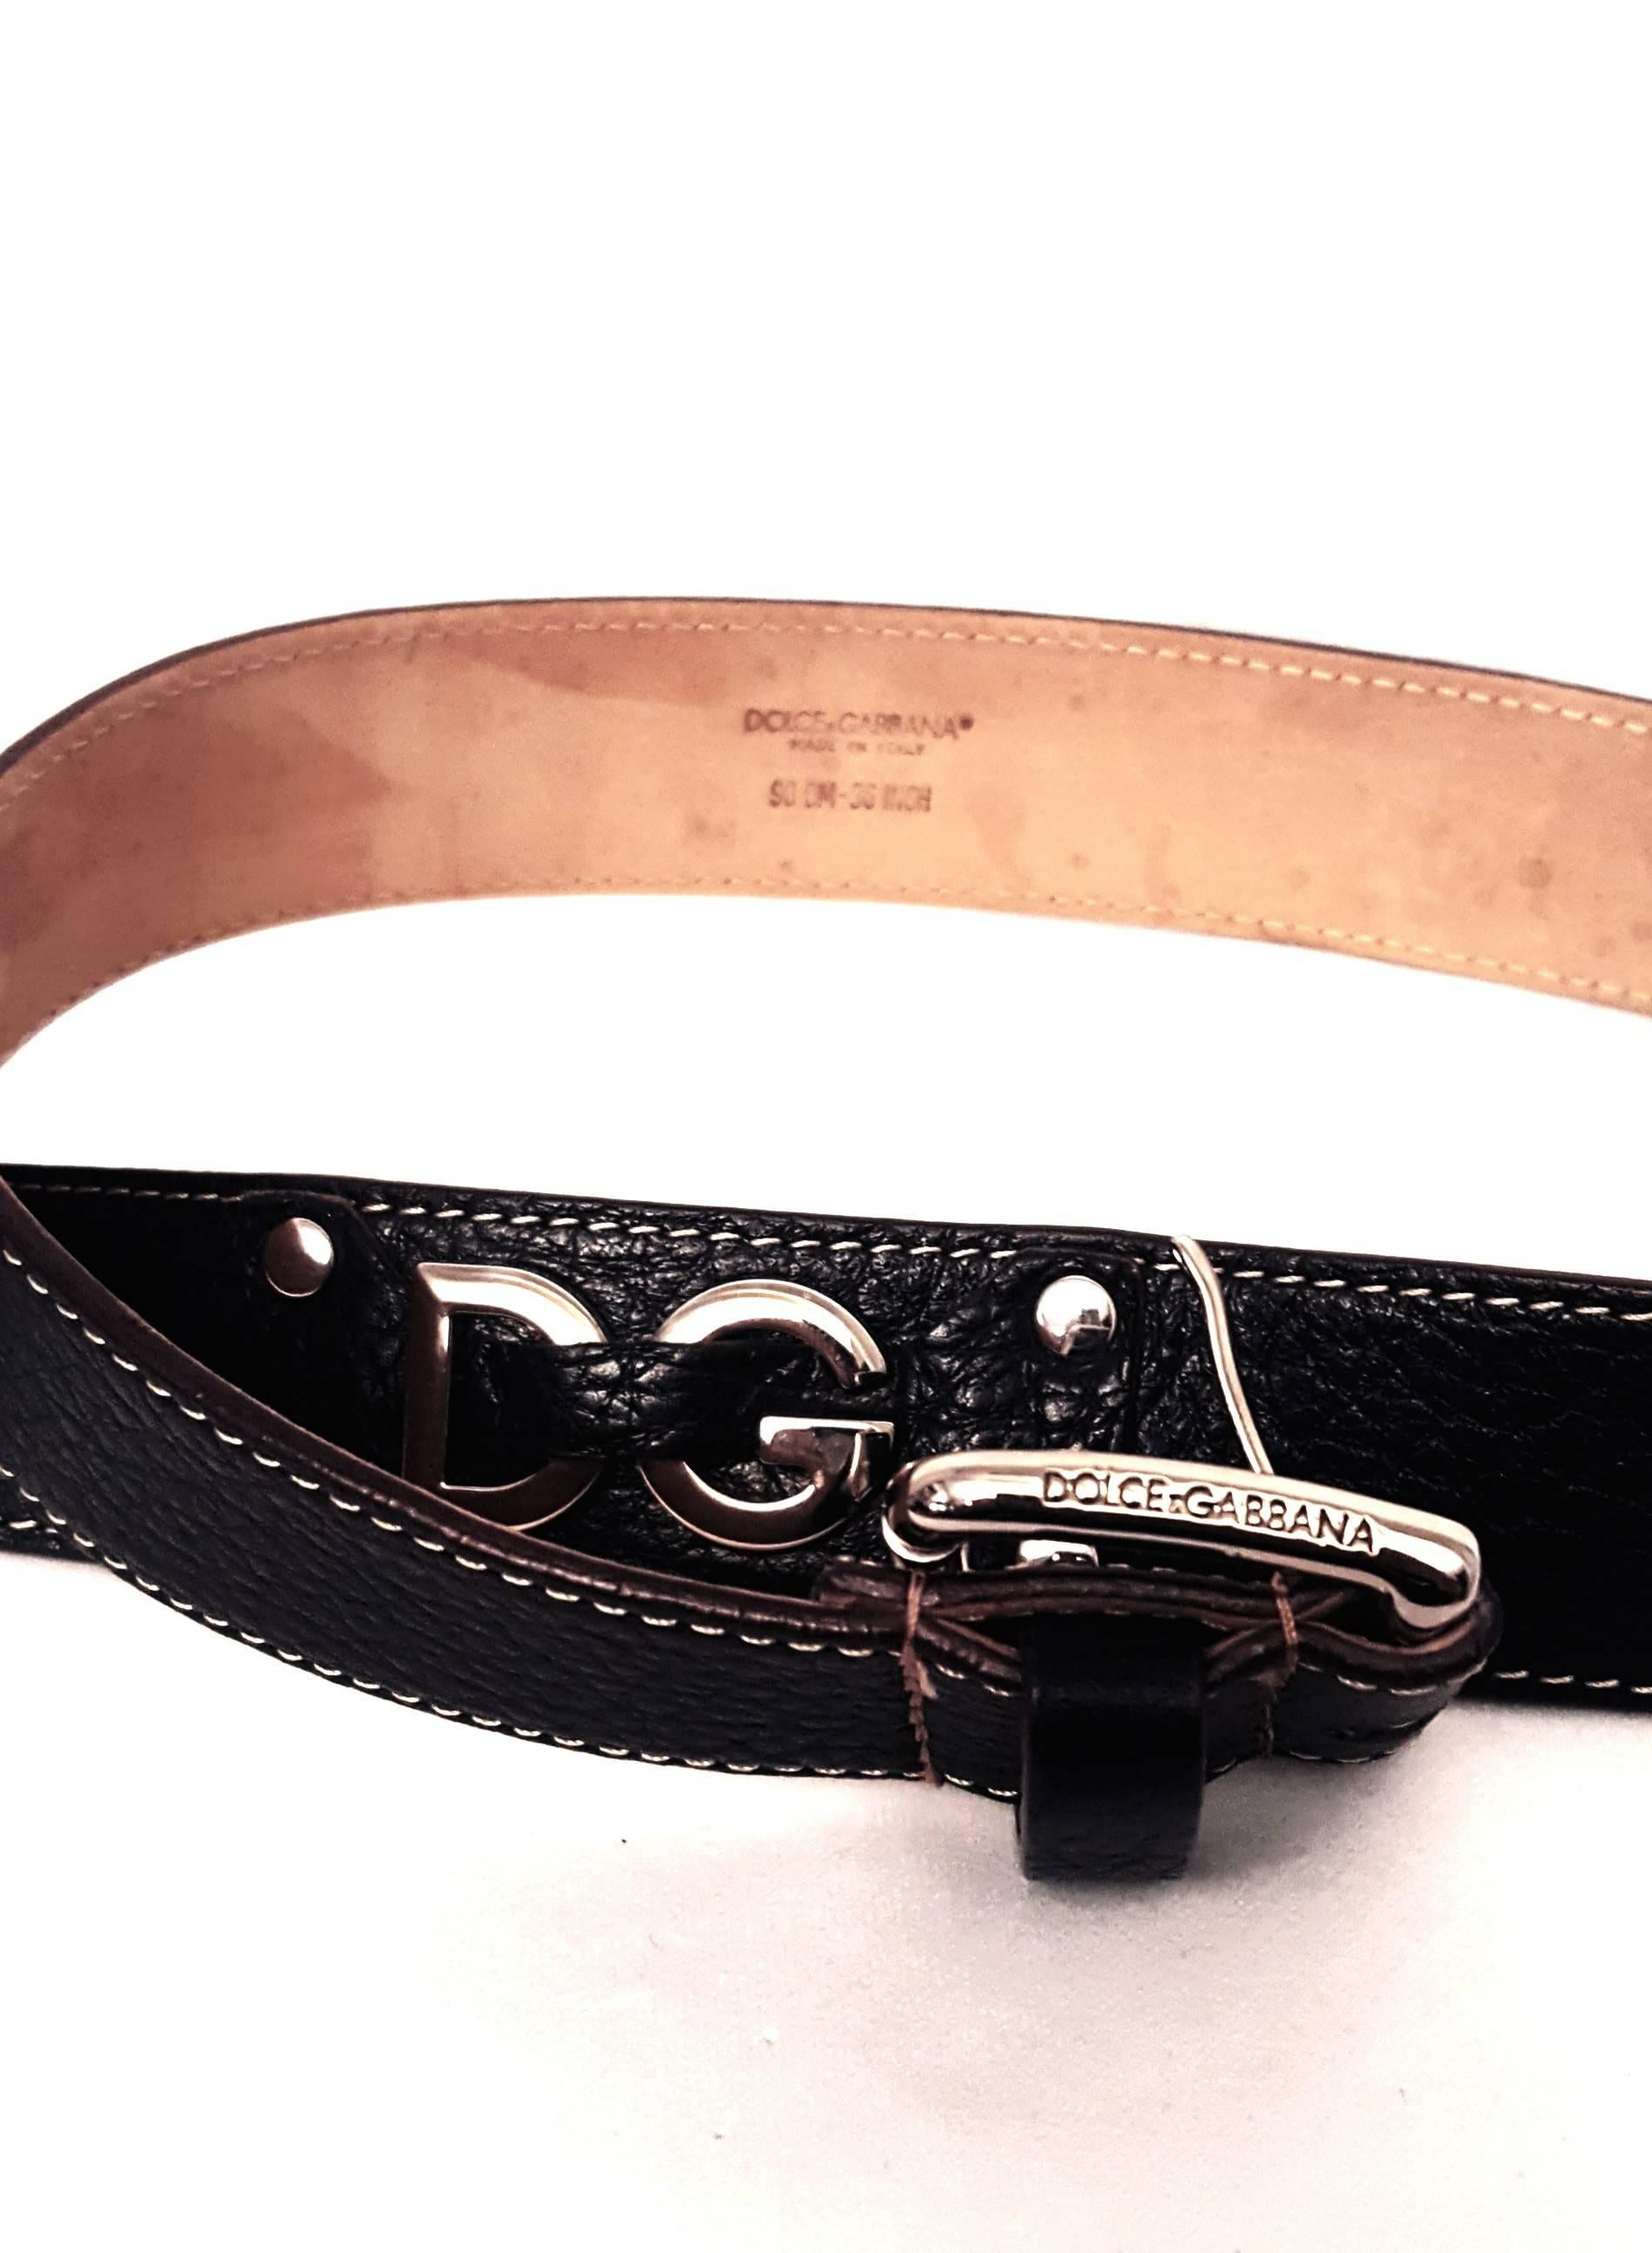 Dolce & Gabbana Black Pebbled Leather Belt  Logo on Belt and Silver Tone Buckle  In Excellent Condition For Sale In Palm Beach, FL